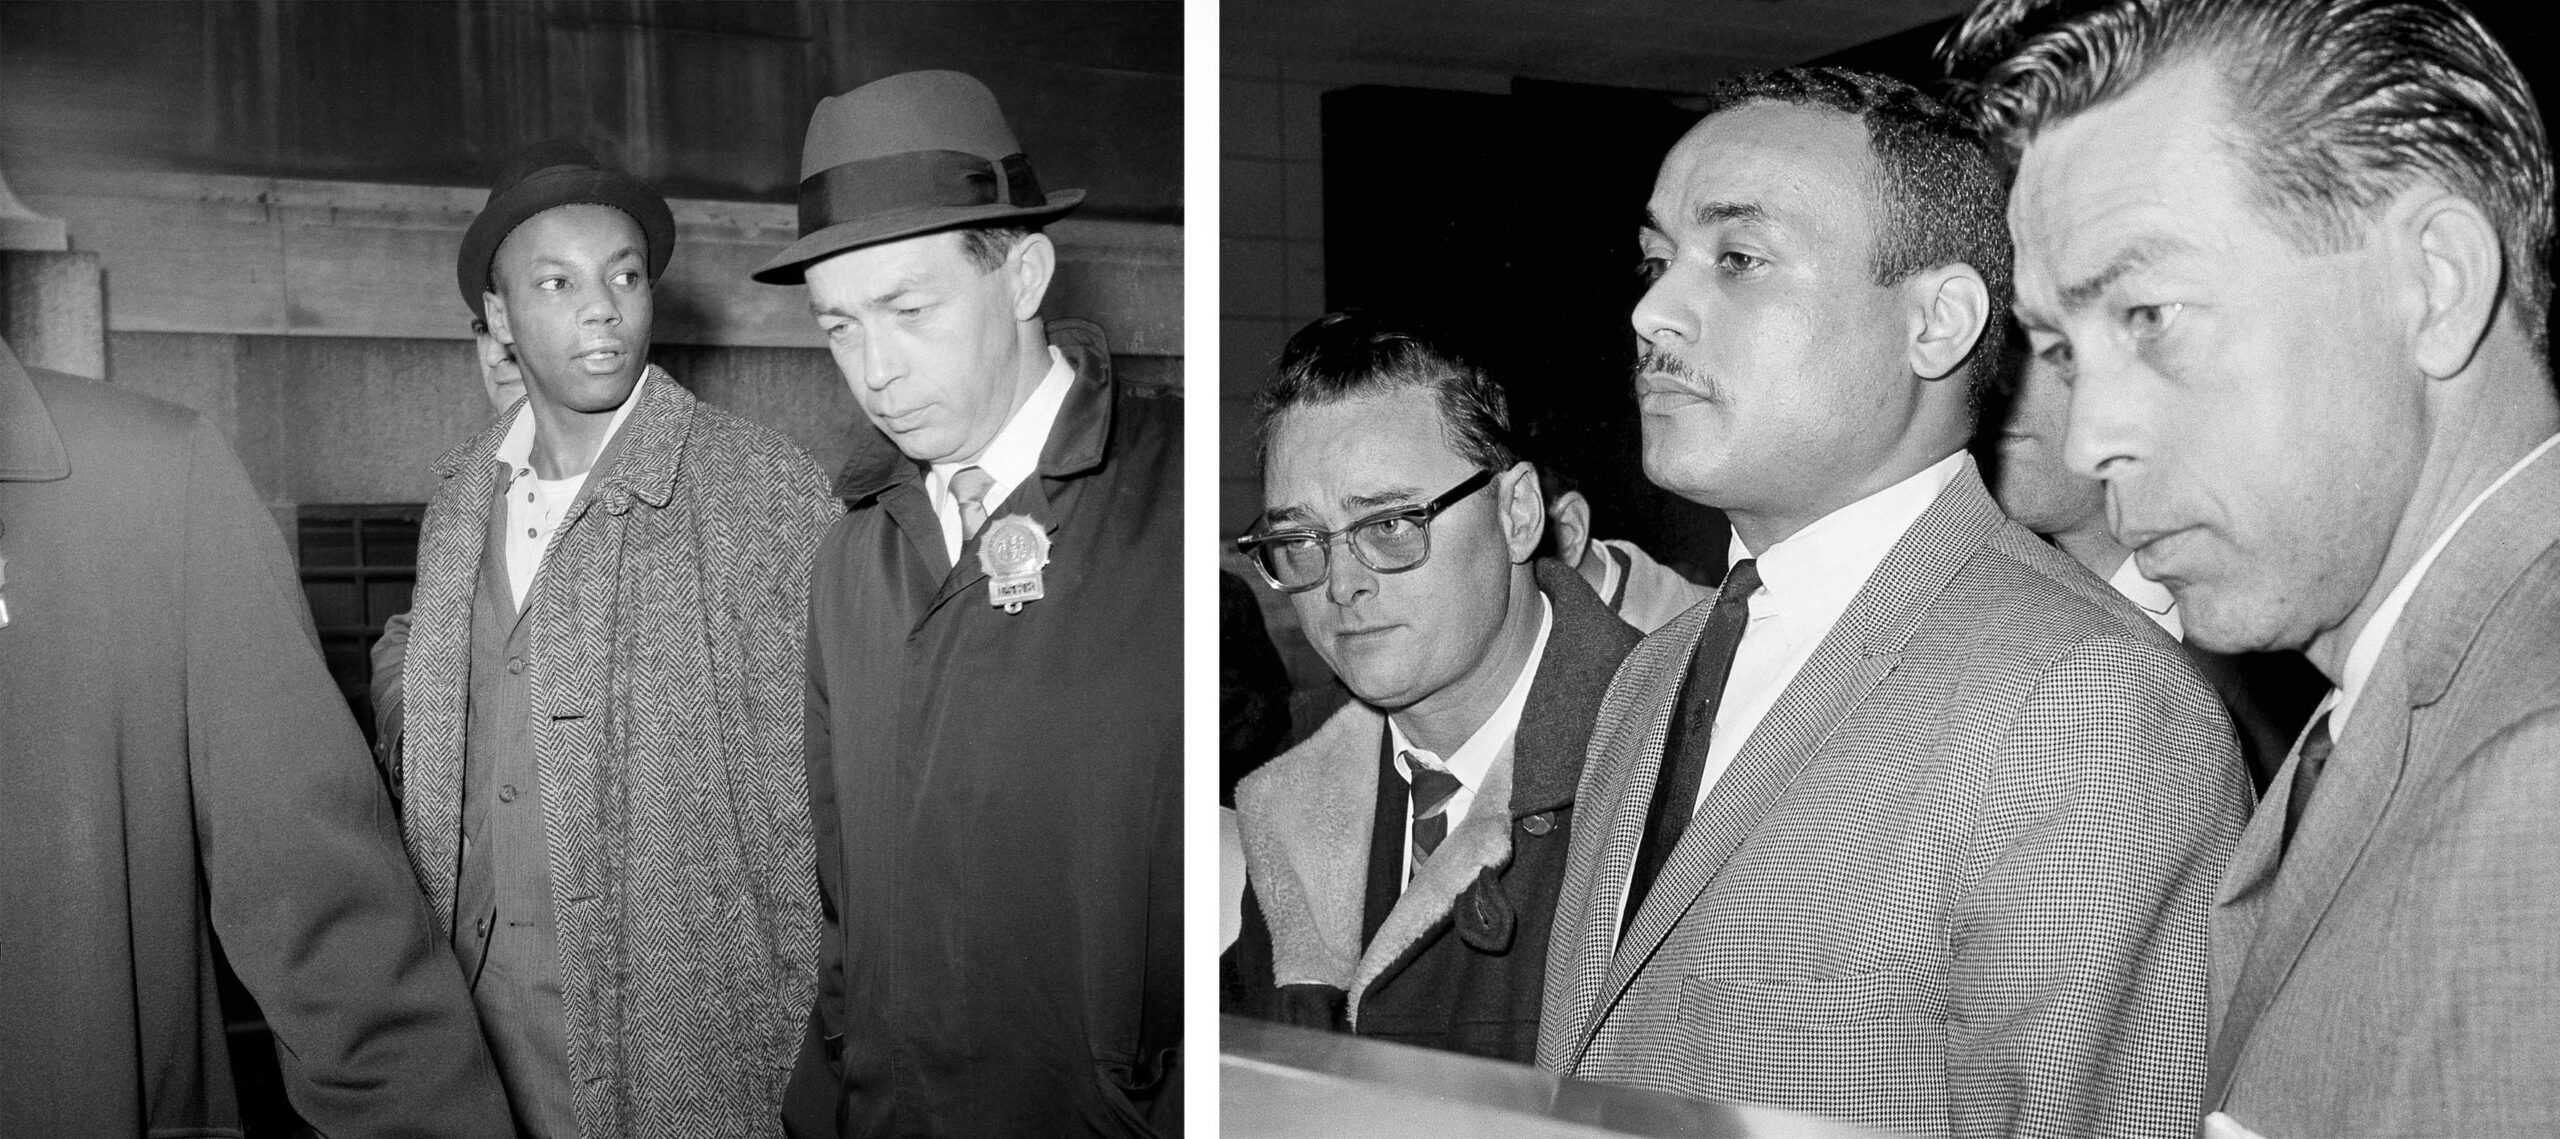 Left: Muhammad Aziz (then Norman 3X Butler) escorted by detectives in New York, Feb. 26, 1965. (Image: Associated Press). Right: Khalil Islam (then Thomas 15X Johnson) in New York, March 3, 1965. (Image: Associated Press)